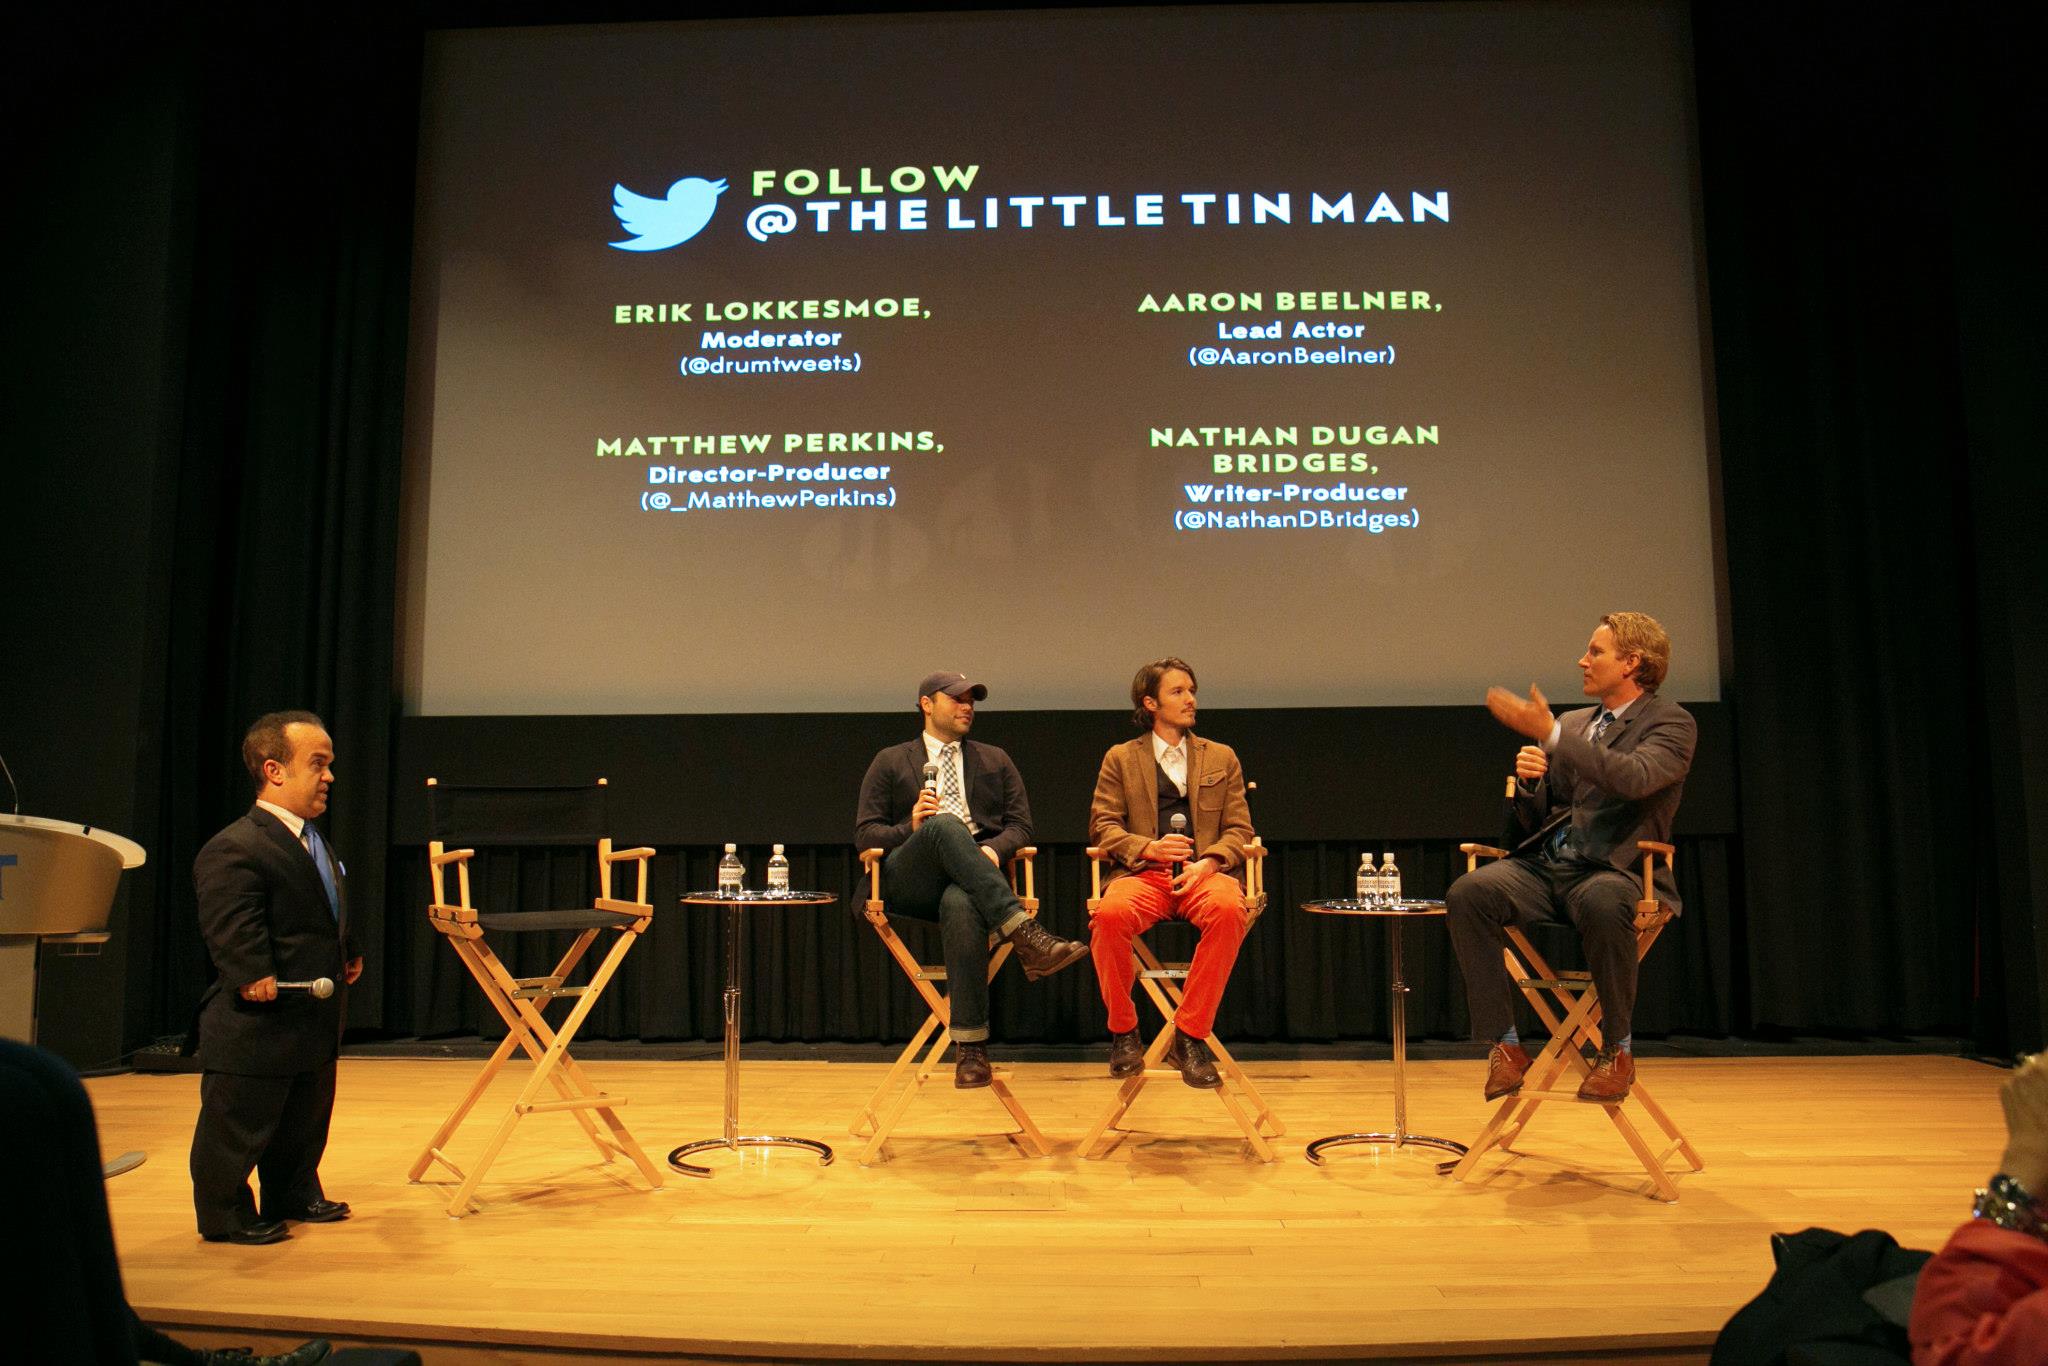 NYC Q&A for The Little Tin Man